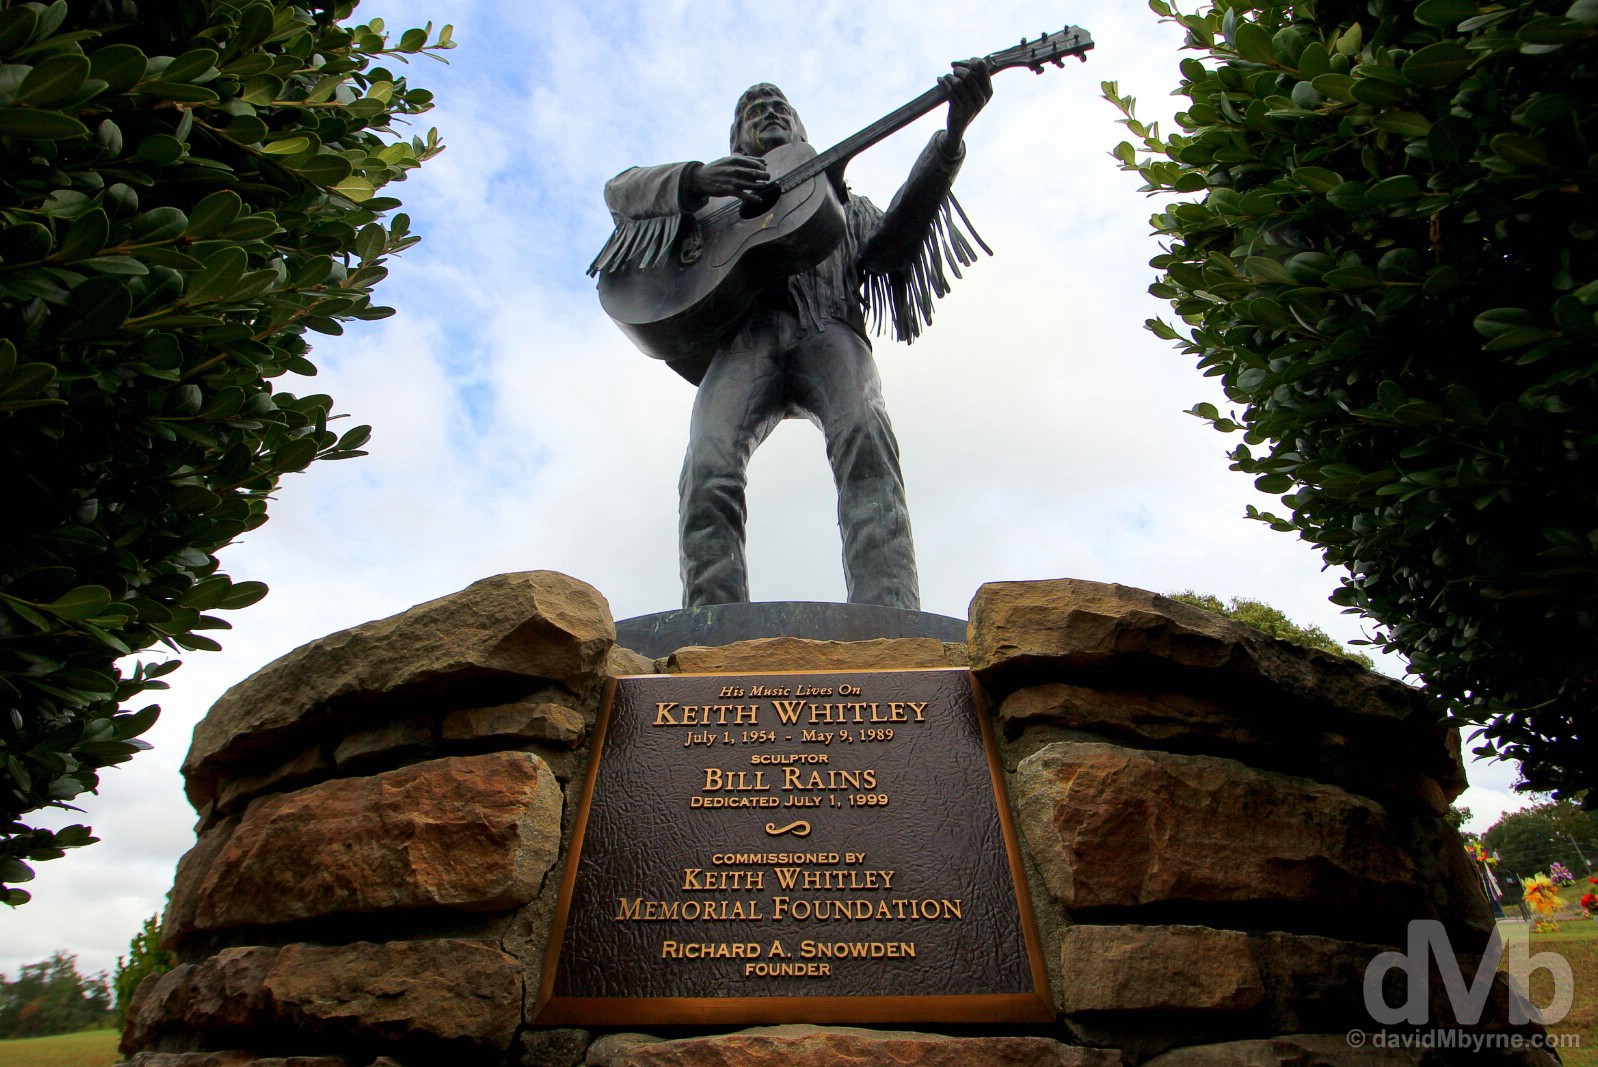 The Keith Whitley statue in the graveyard in Sandy Hook, Elliott County, Kentucky, USA. September 26, 2016.